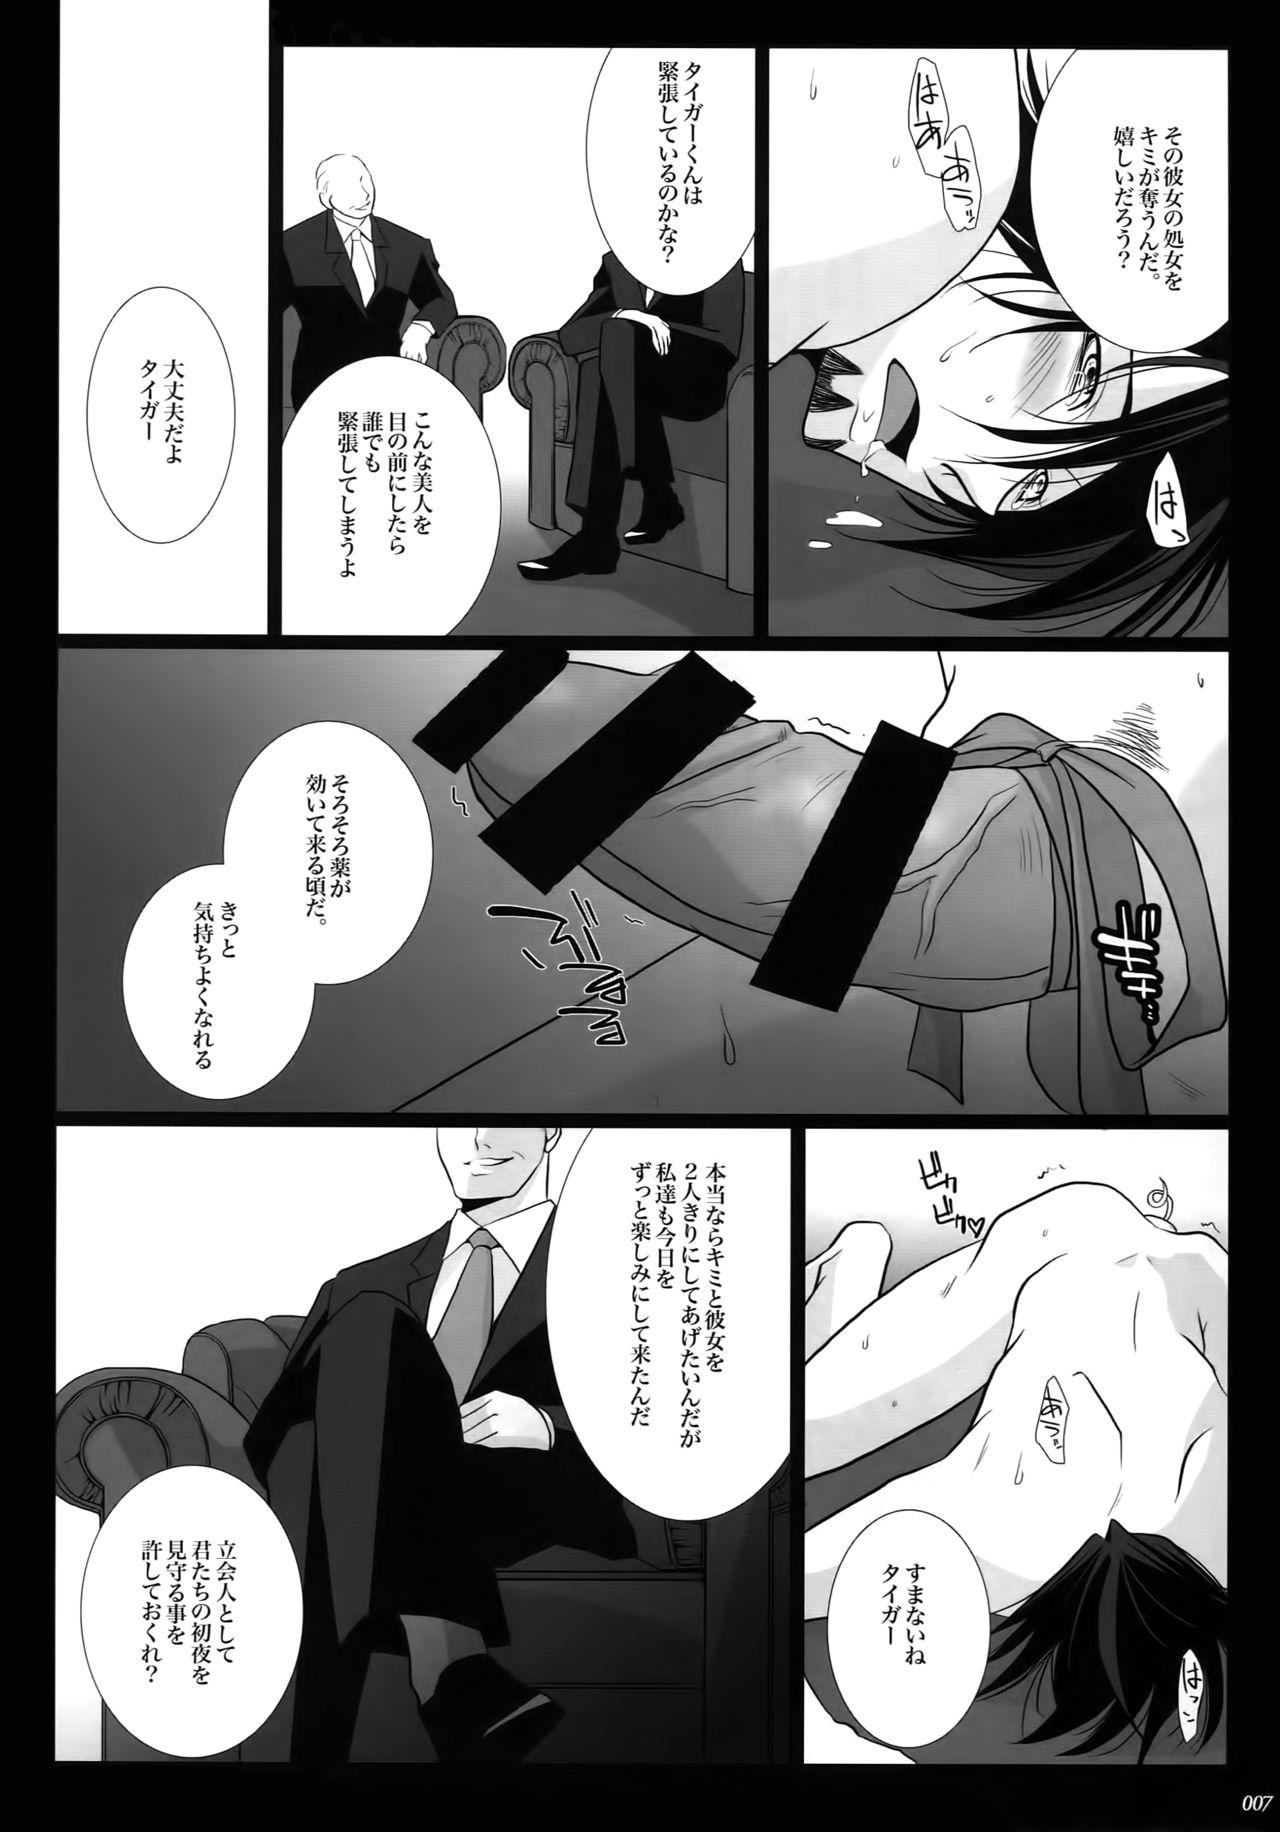 Naughty mob;Re - Tiger and bunny Nigeria - Page 6